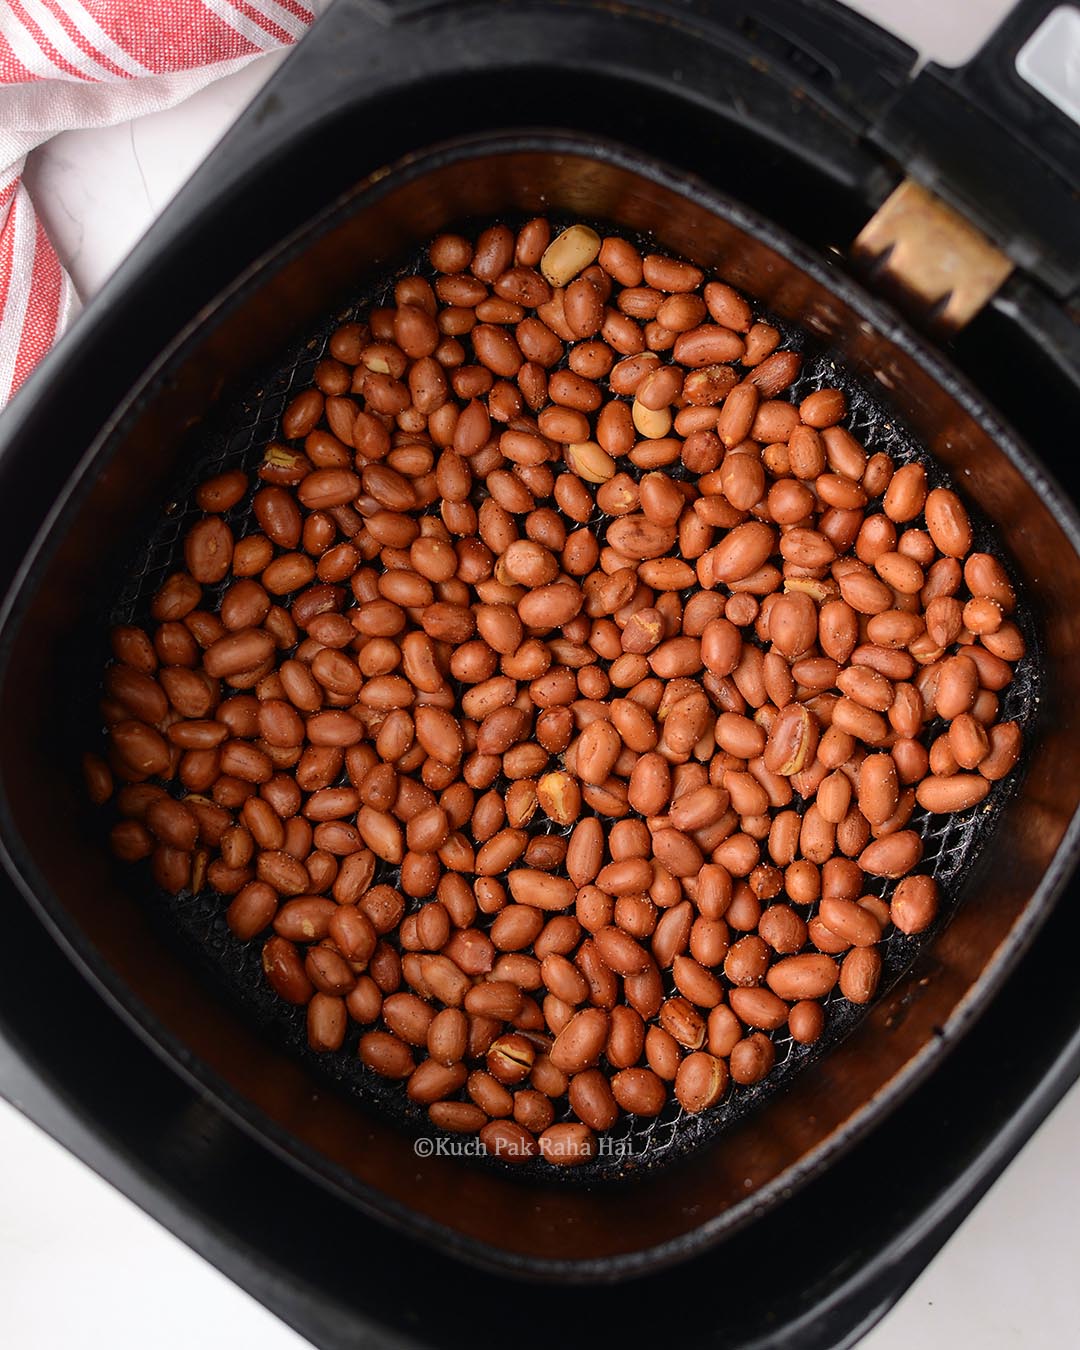 How to bake peanuts in air fryer